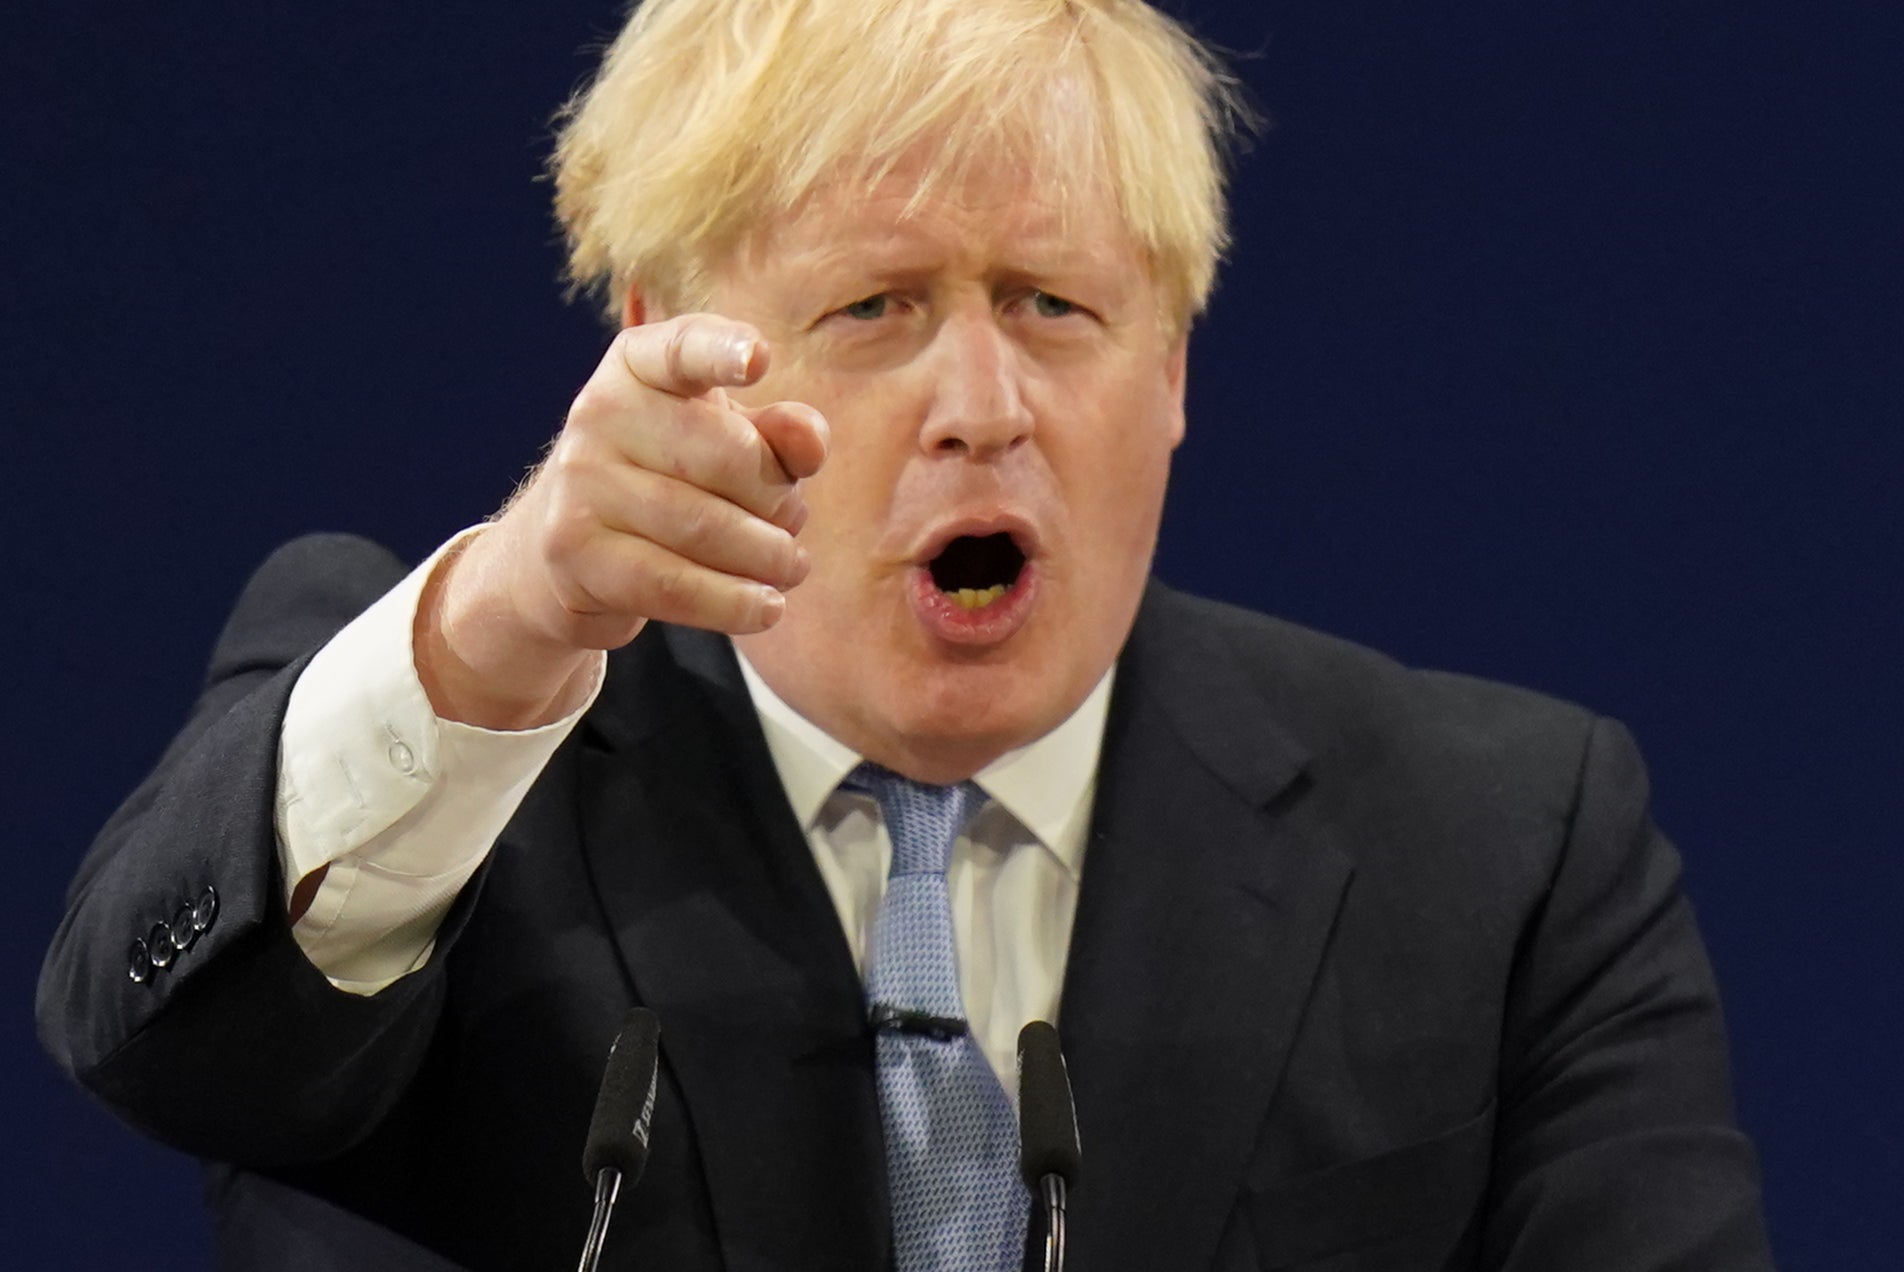 Boris Johnson delivers his keynote speech to the Conservative Party conference (Jacob King/PA)